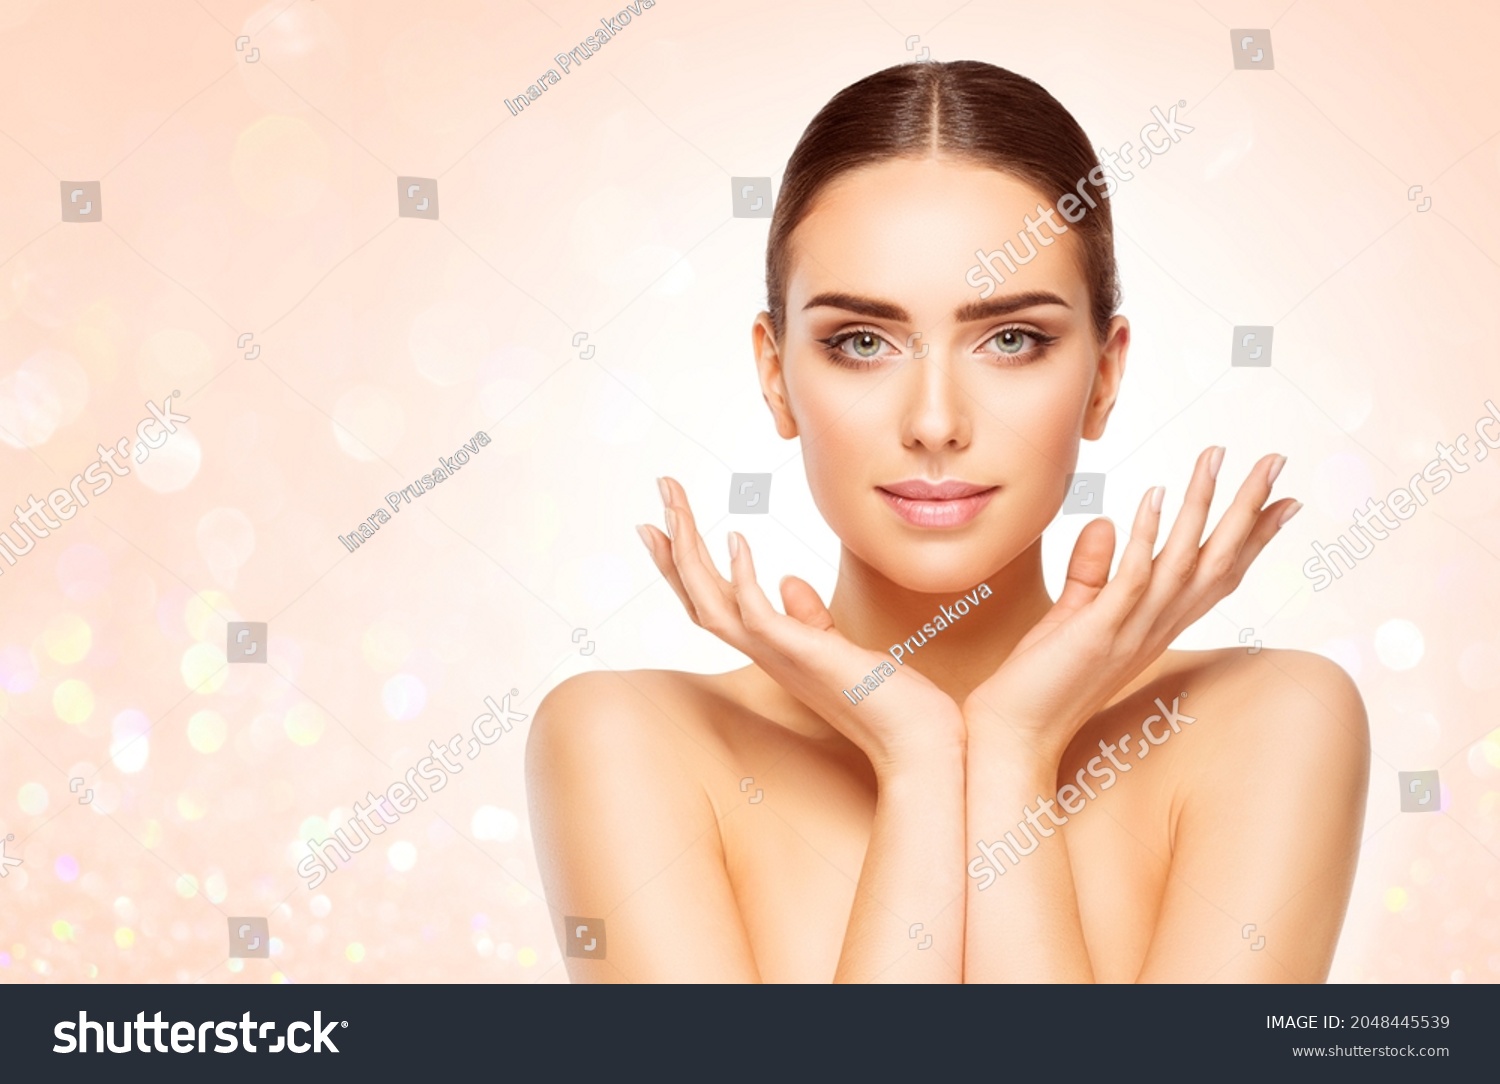 Perfect Skin Face Woman Portrait. Beauty Model with open Hands under Chin over Bright Shining Beige Background. Skin Care Cosmetic Cosmetology #2048445539